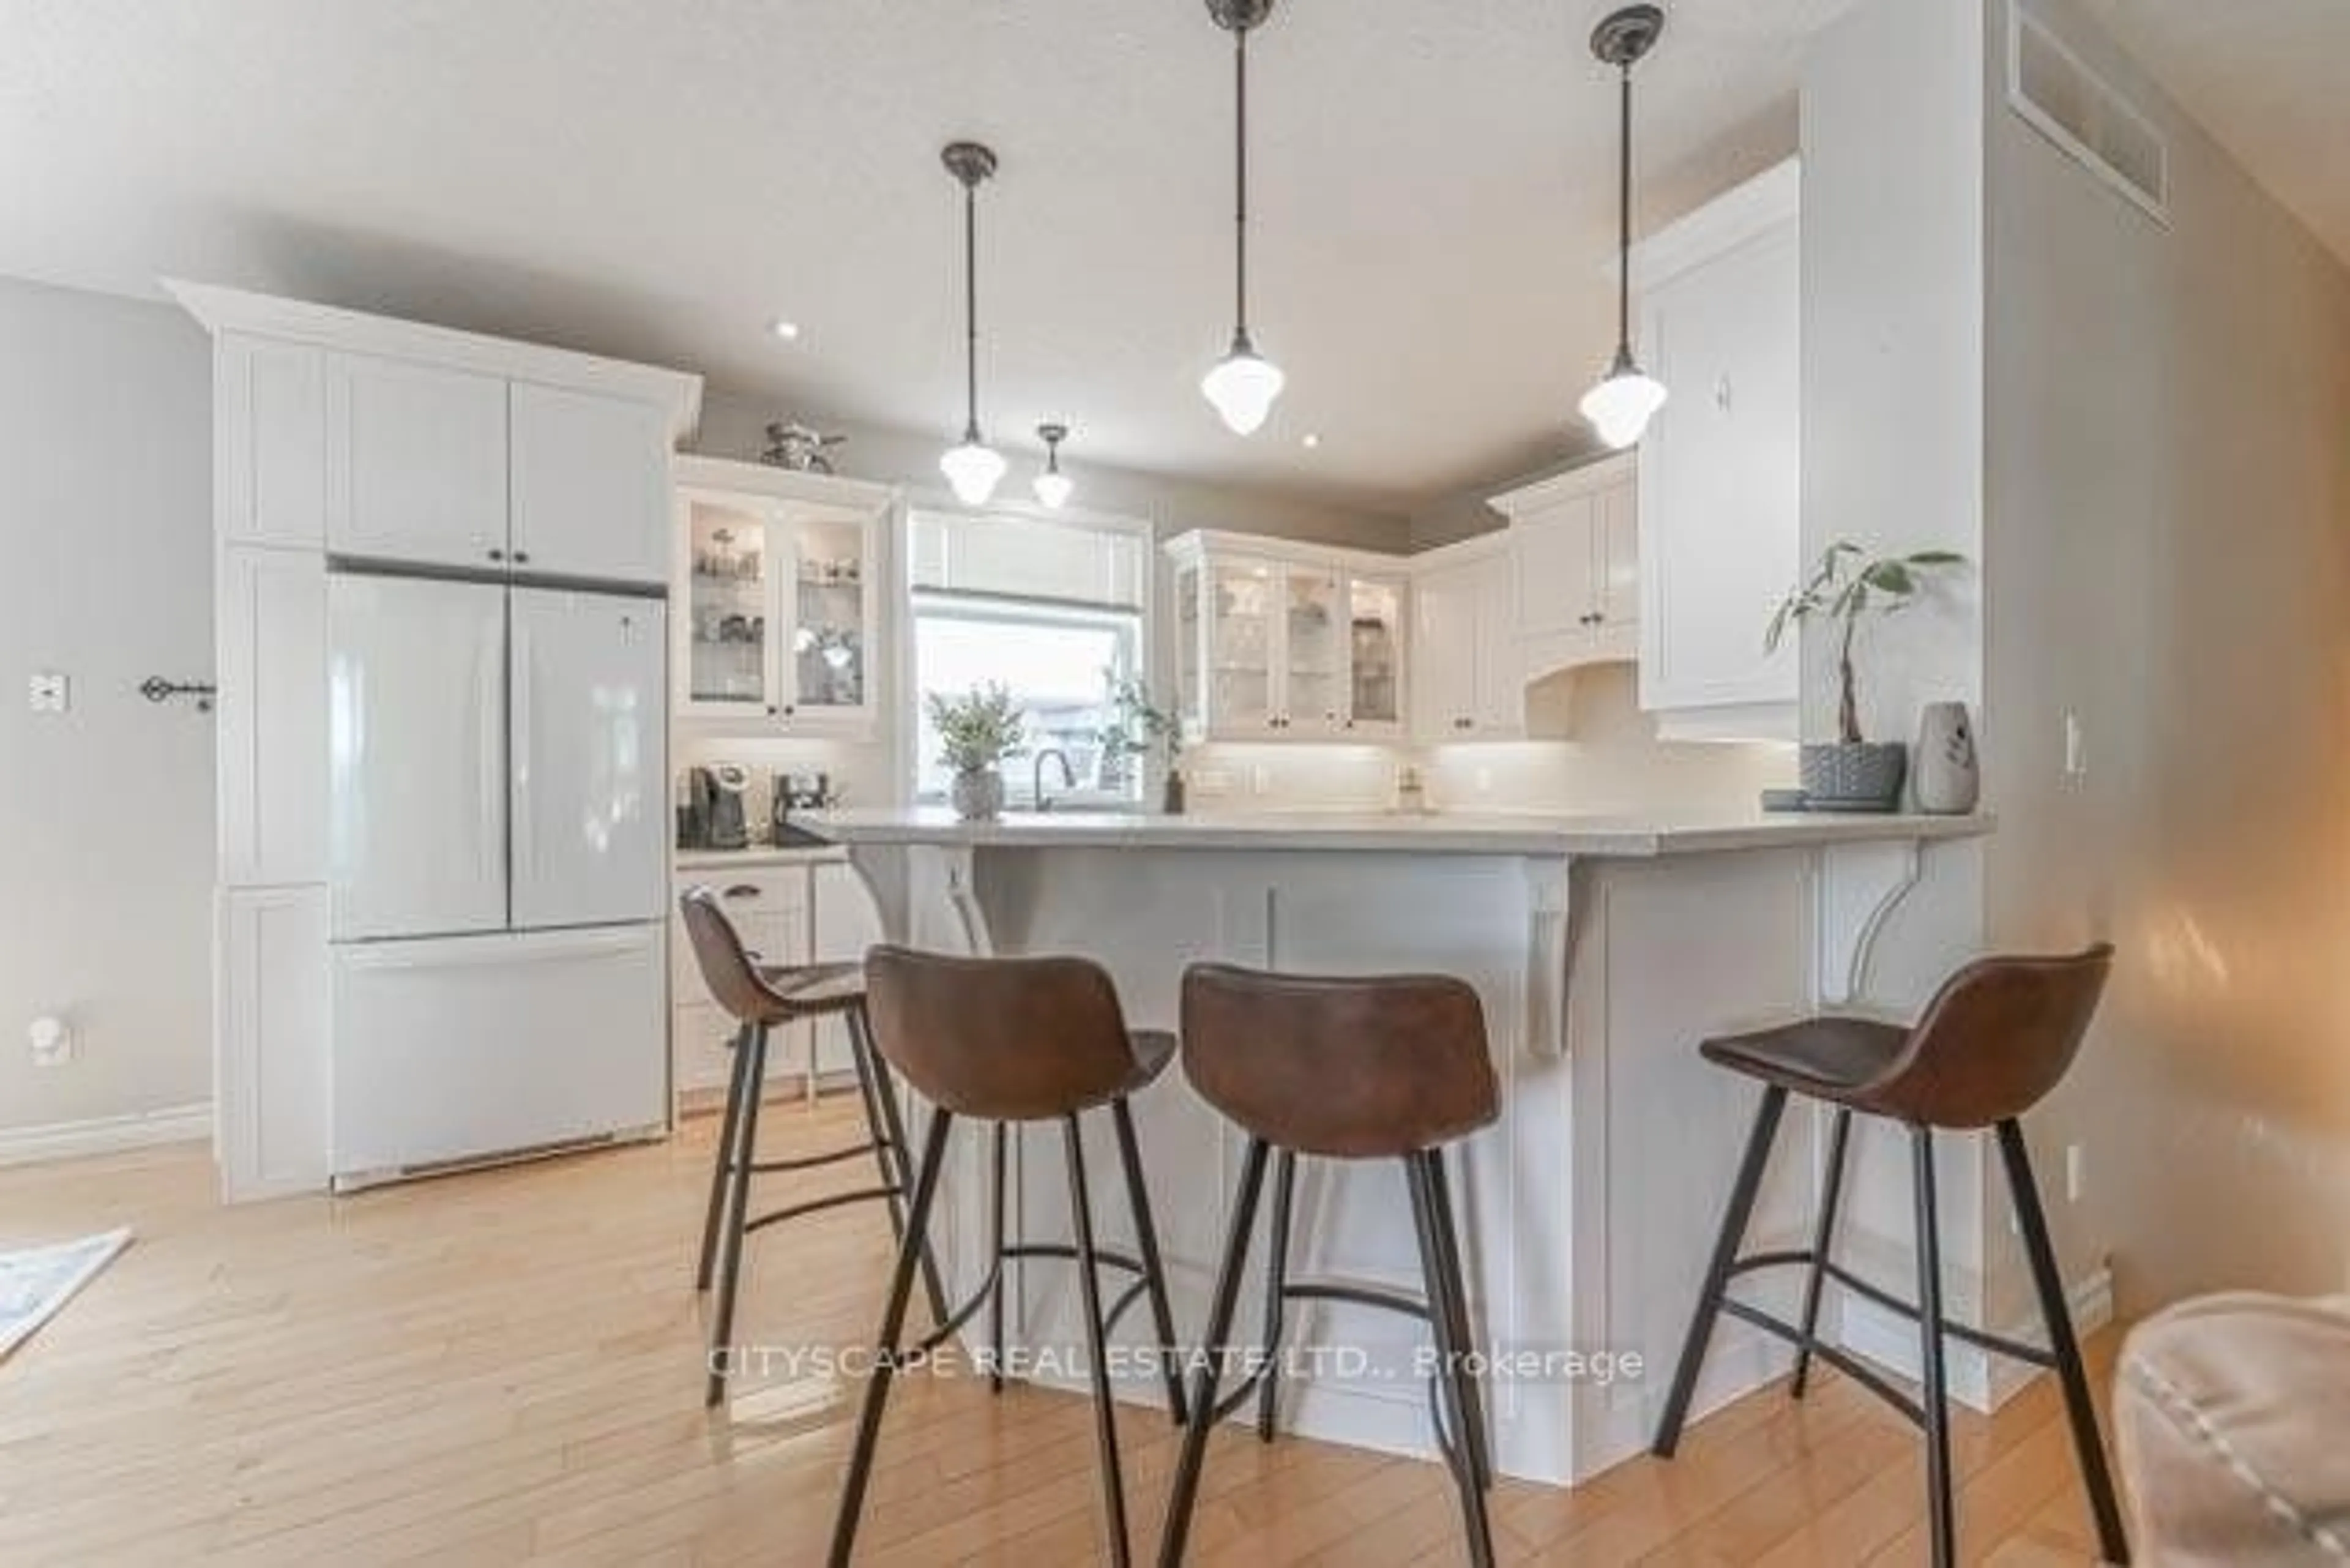 Contemporary kitchen for 4833 Bruce County 3 Rd, Saugeen Shores Ontario N0H 2C6